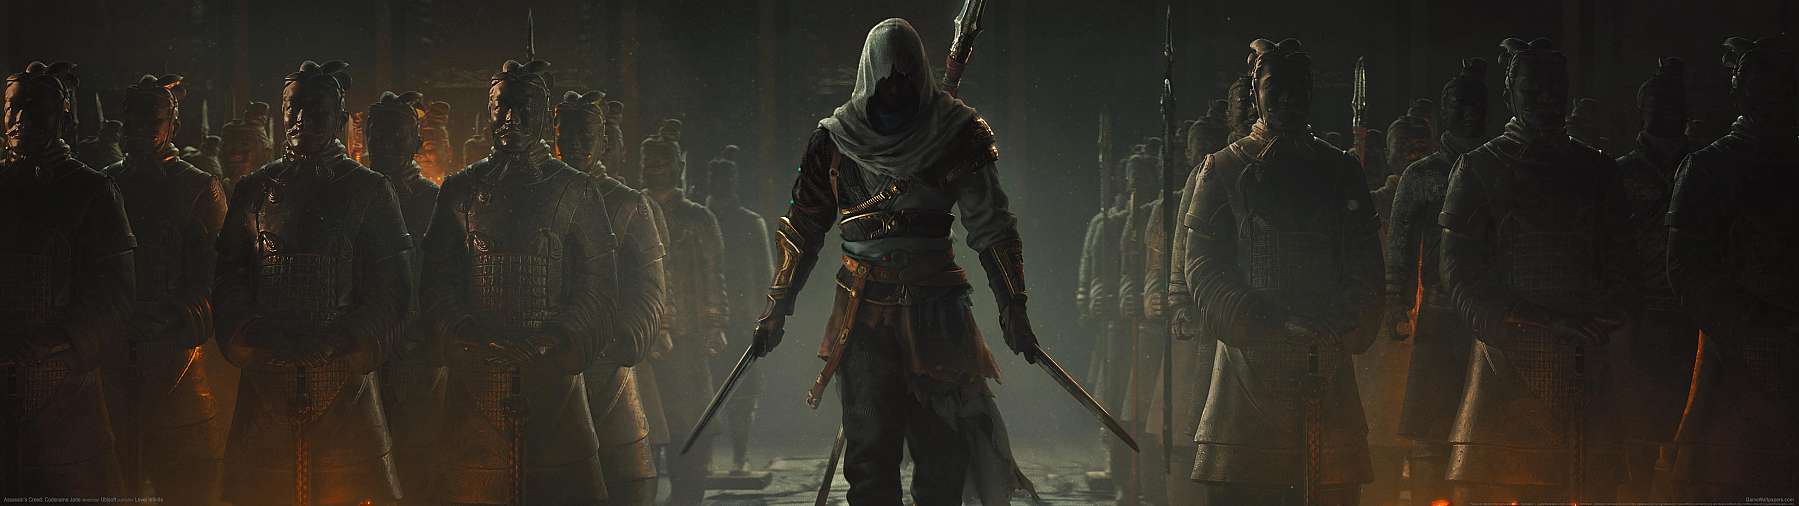 Assassin's Creed: Codename Jade wallpaper or background